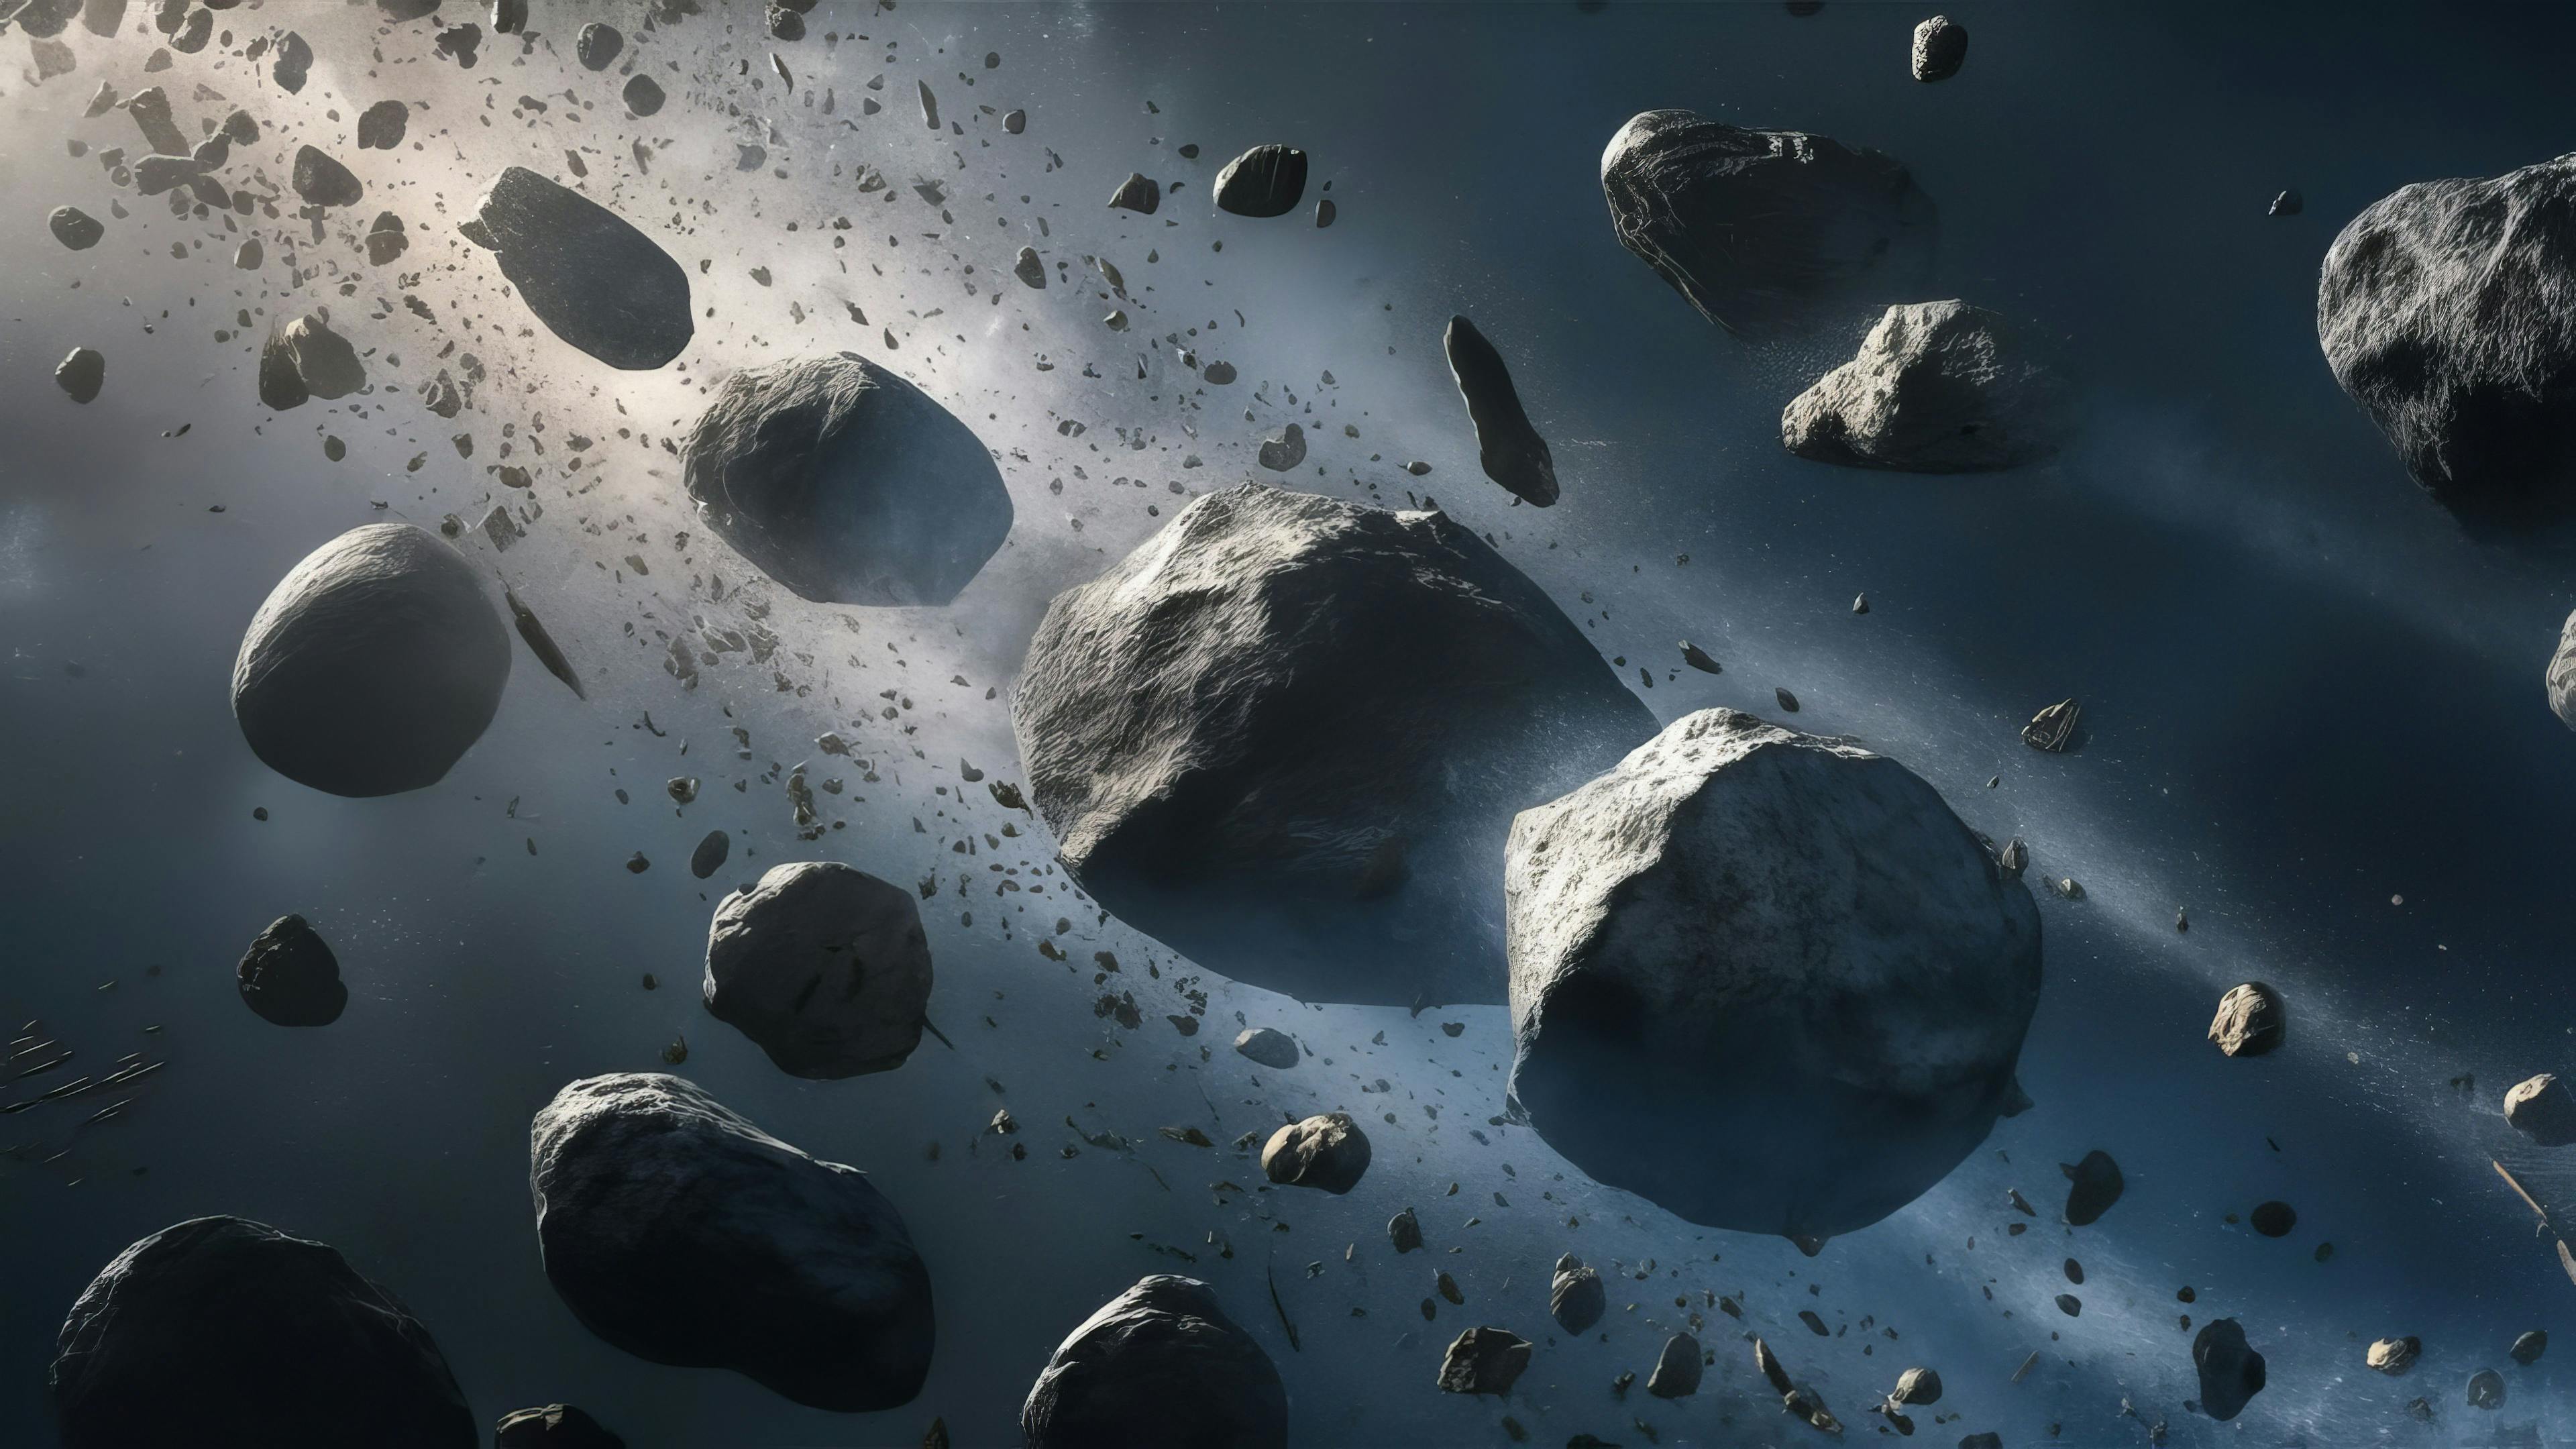 A swarm of asteroids, boulders, or stone meteorites. Generated with AI. | Image Credit: © cherif - stock.adobe.com